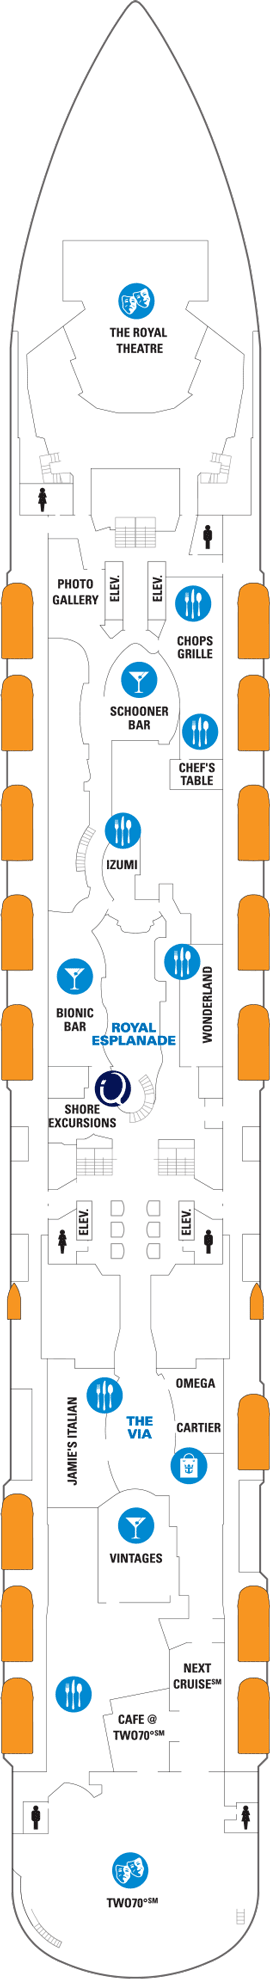 Ovation of the Seas Deck Plans